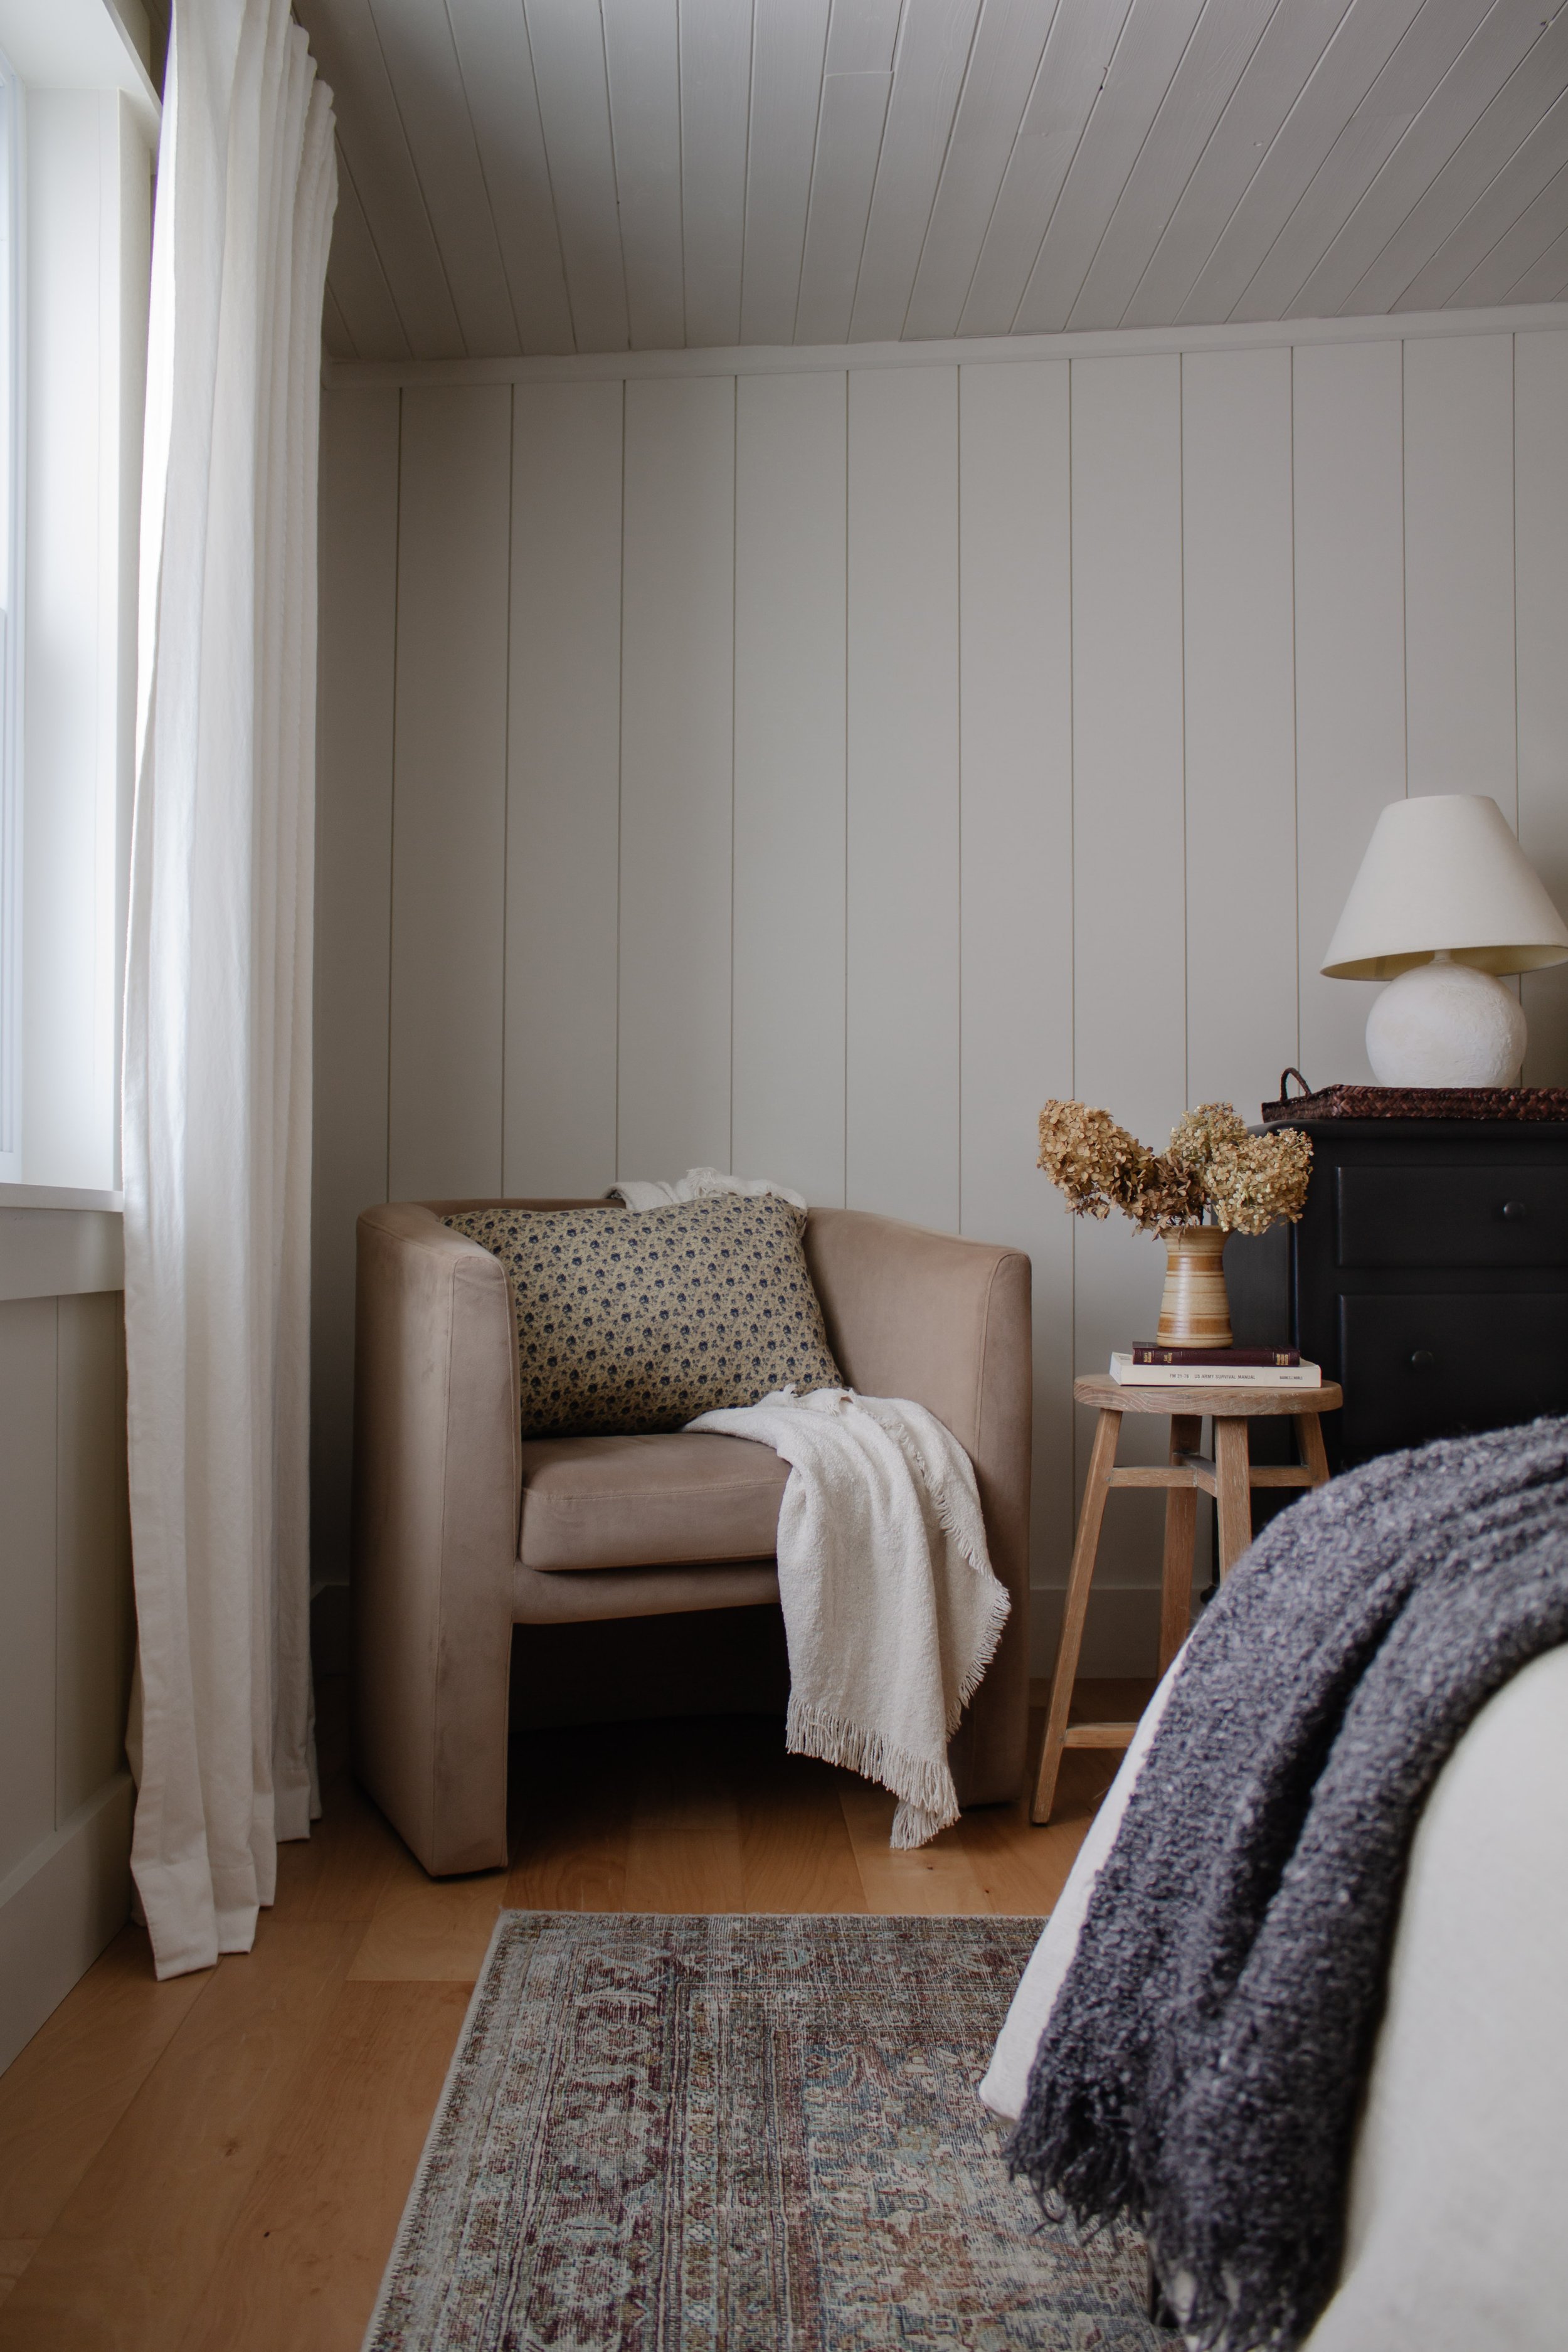 Bedroom styling by Nadine Stay. Vertical plank walls with wood planked ceiling. Putty white paint color. Round barrel chair from Target. Black dresser styling. Dried hydrangea stems. My favorite budget friendly ivory curtains. | Nadine Stay